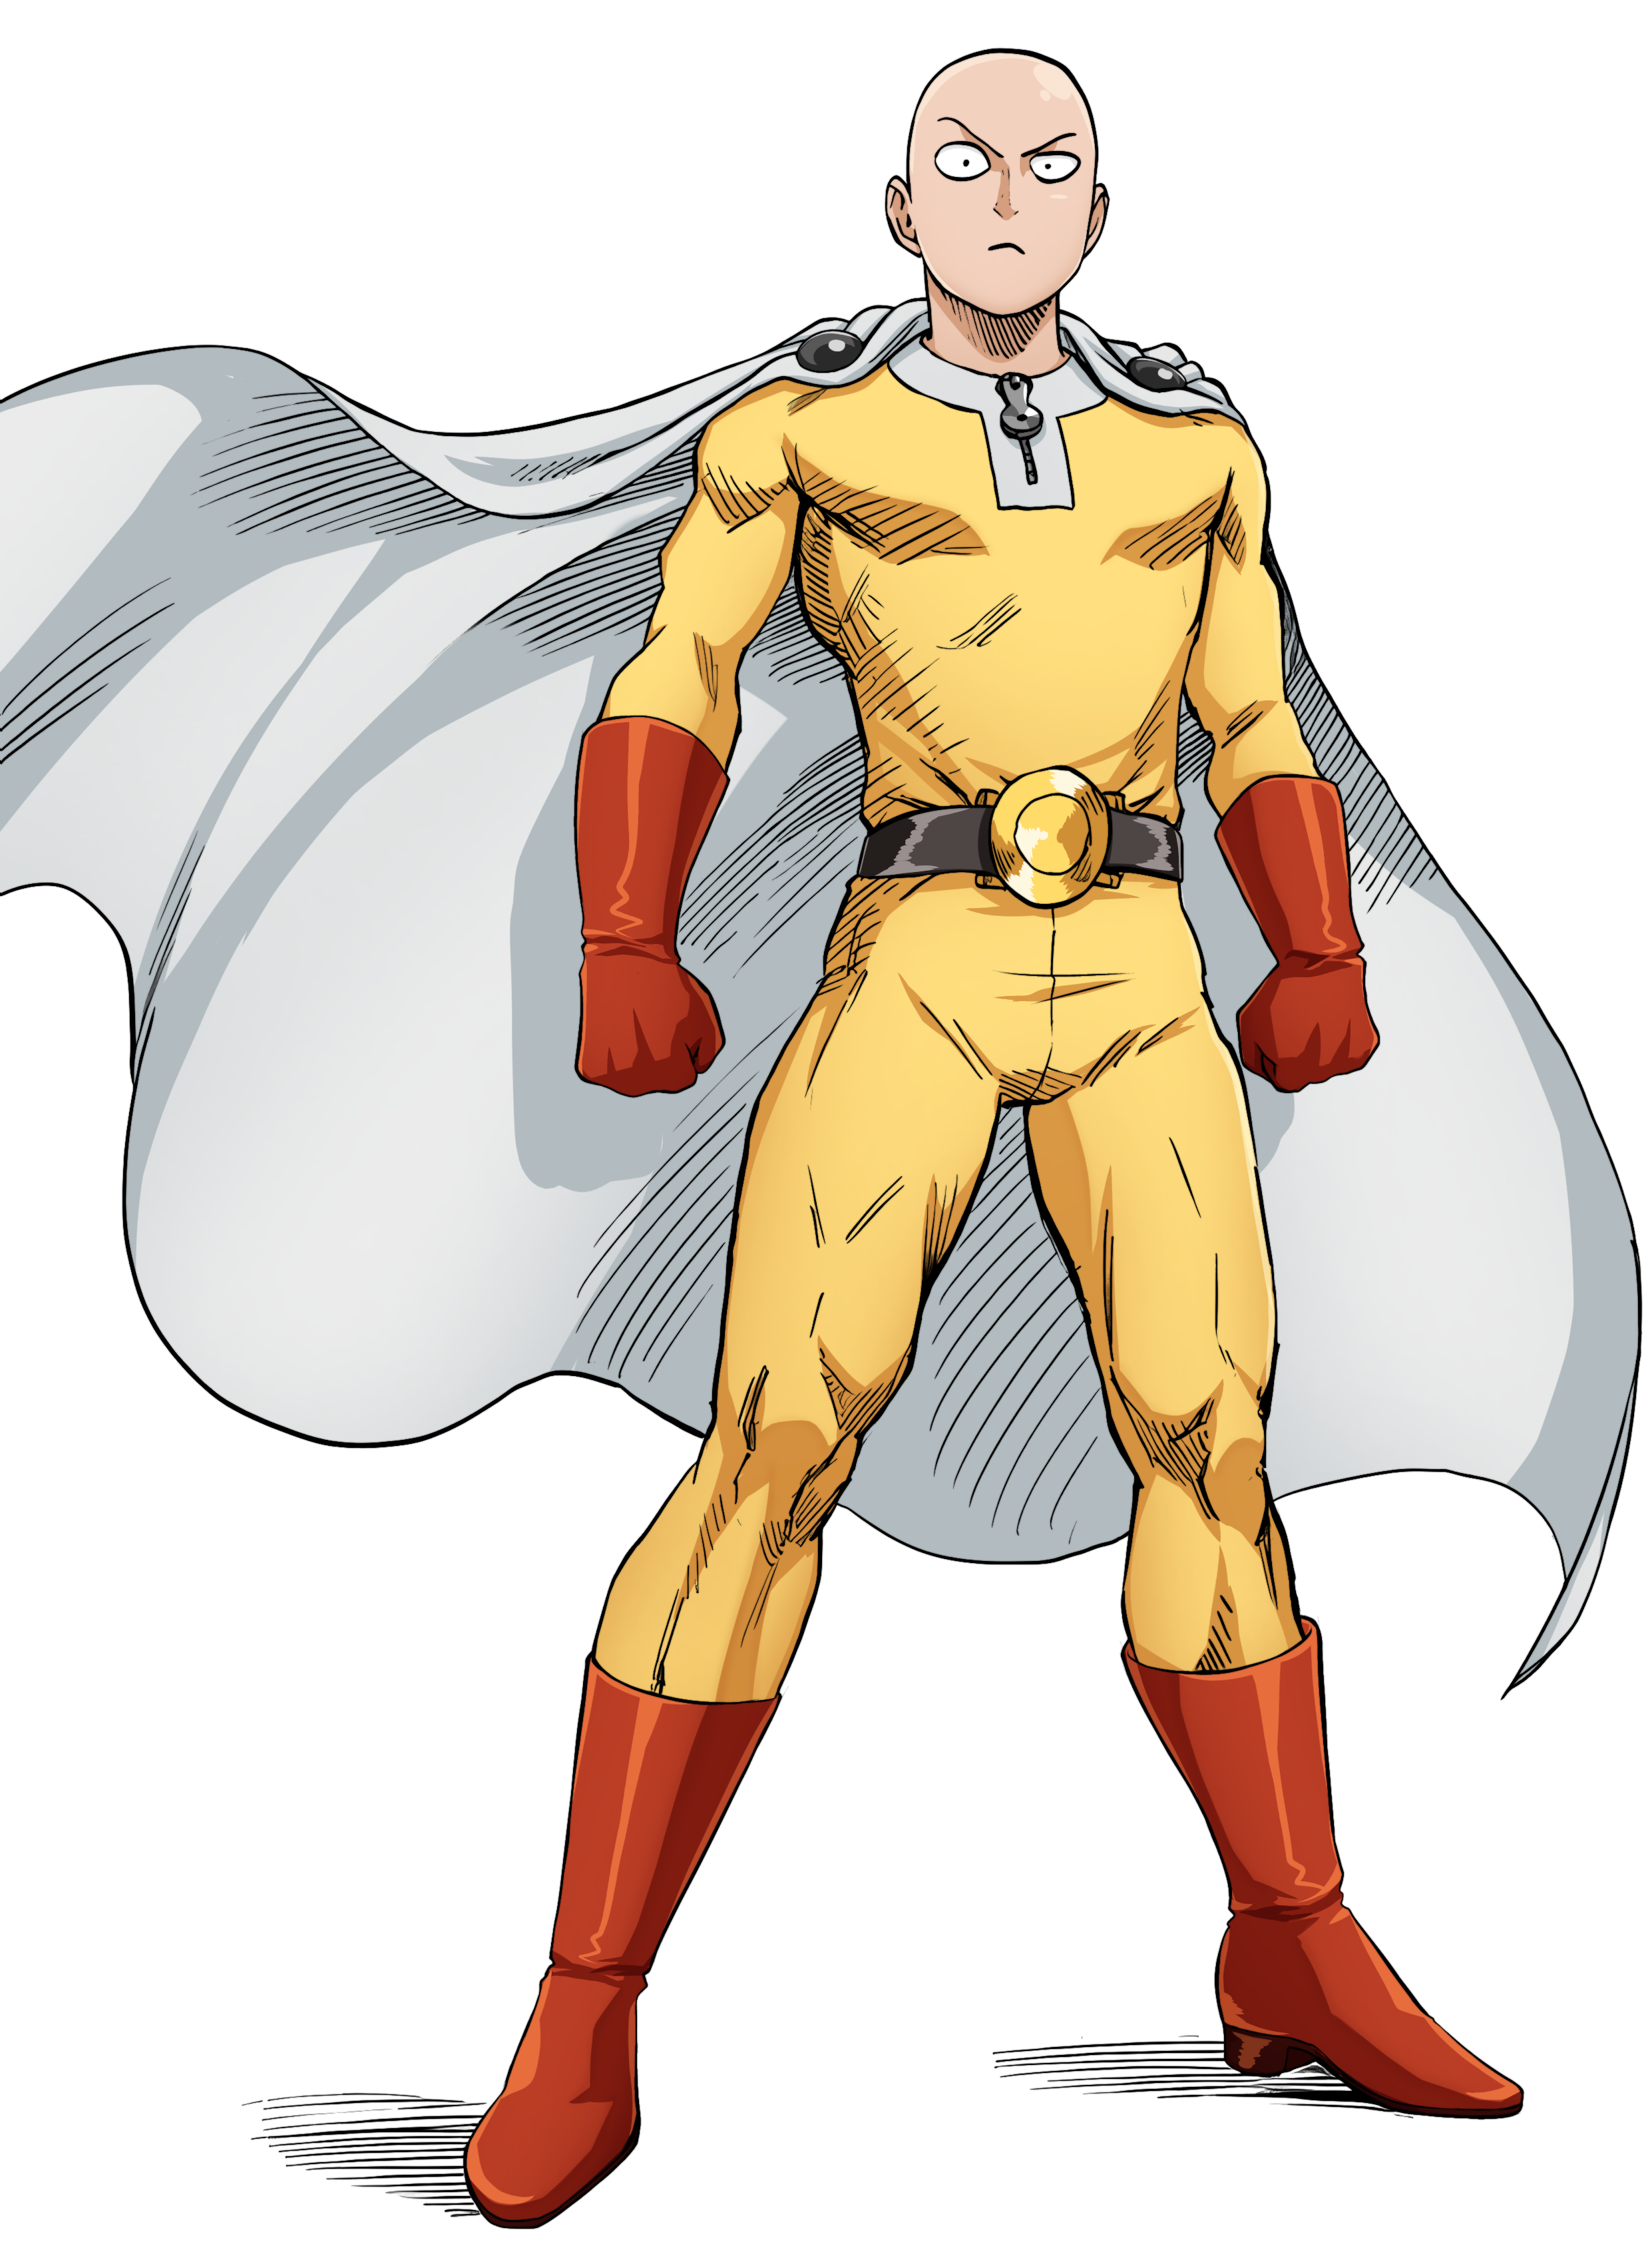 Can Saitama from One Punch Man beat Alexandrite from Steven Universe  because some people on vs battle wiki are claiming he would lose to her and  wouldn't stand a chance? - Quora